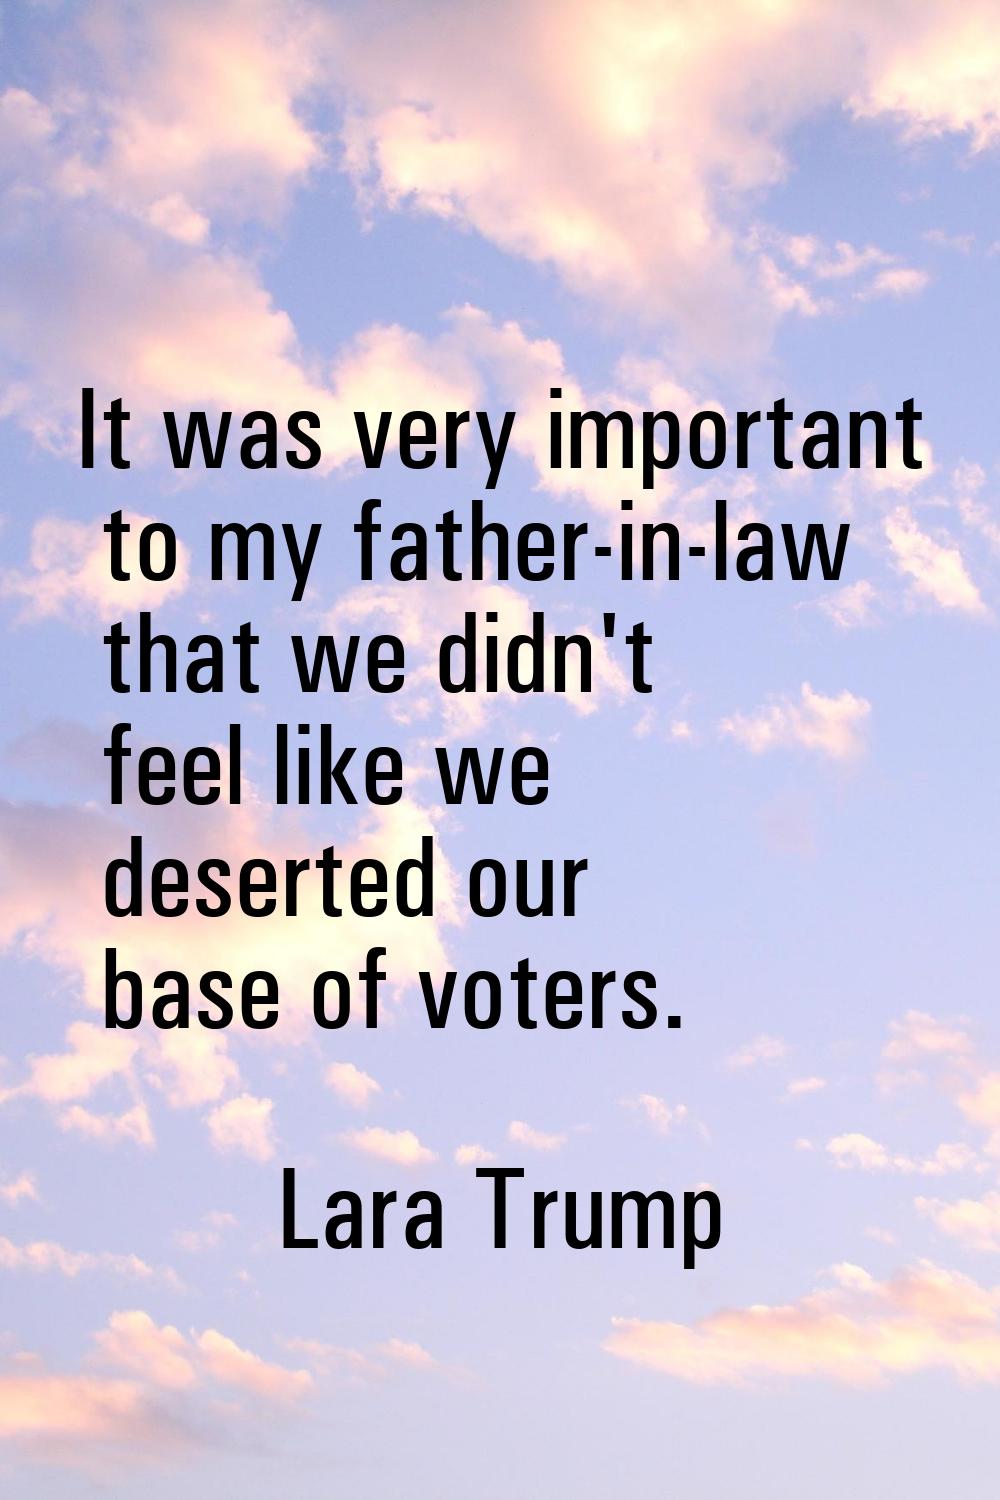 It was very important to my father-in-law that we didn't feel like we deserted our base of voters.